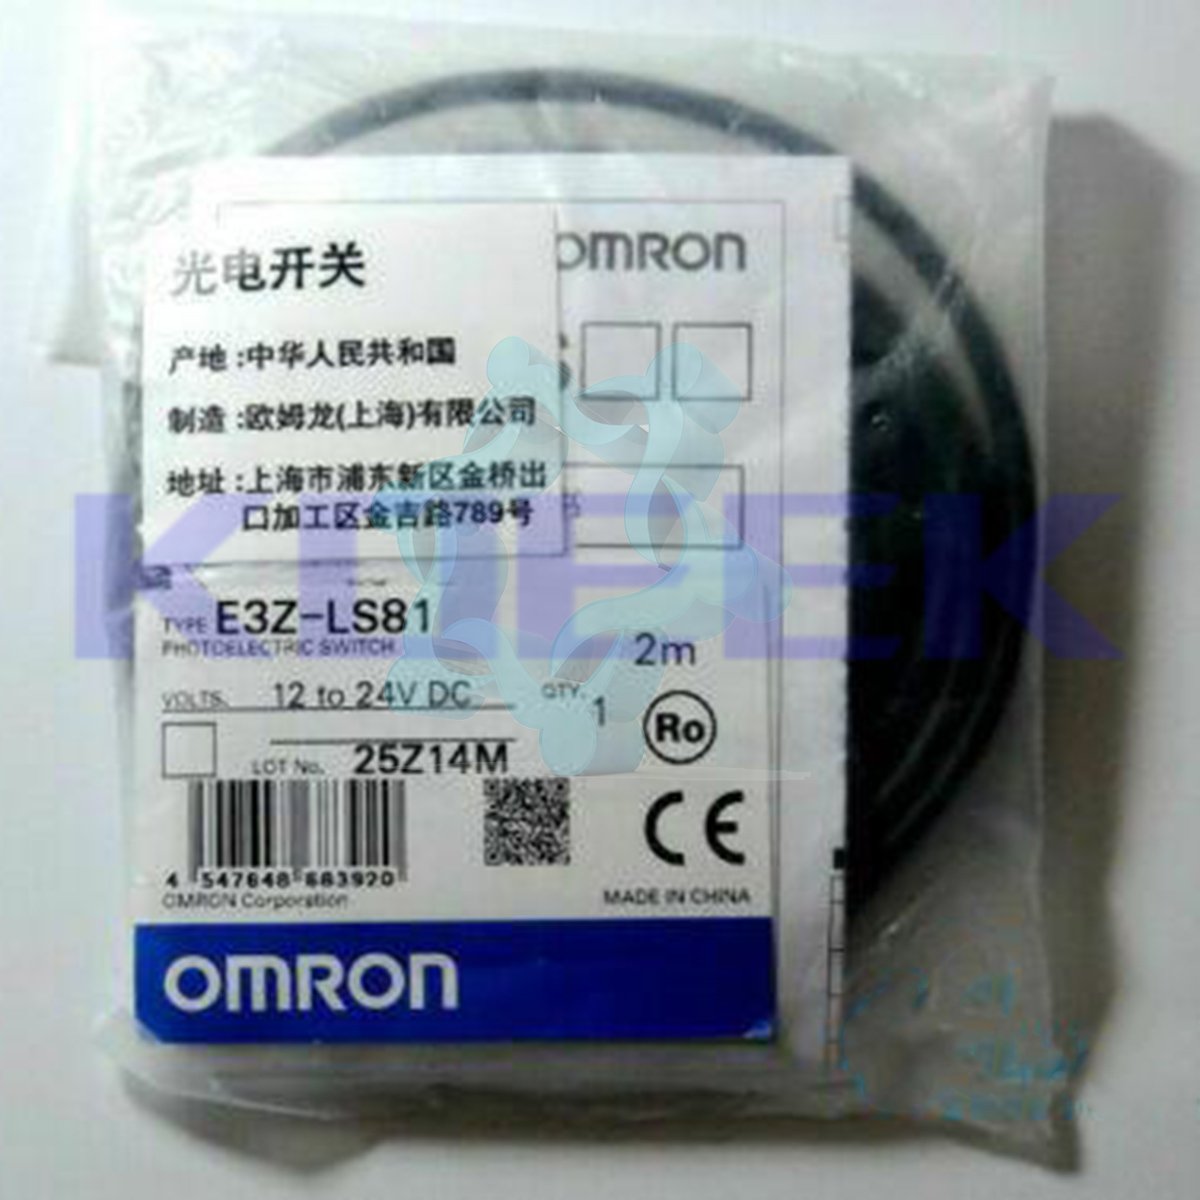 E3Z-LS81 KOEED 1, 80%, import_2020_10_10_031751, Omron, Other